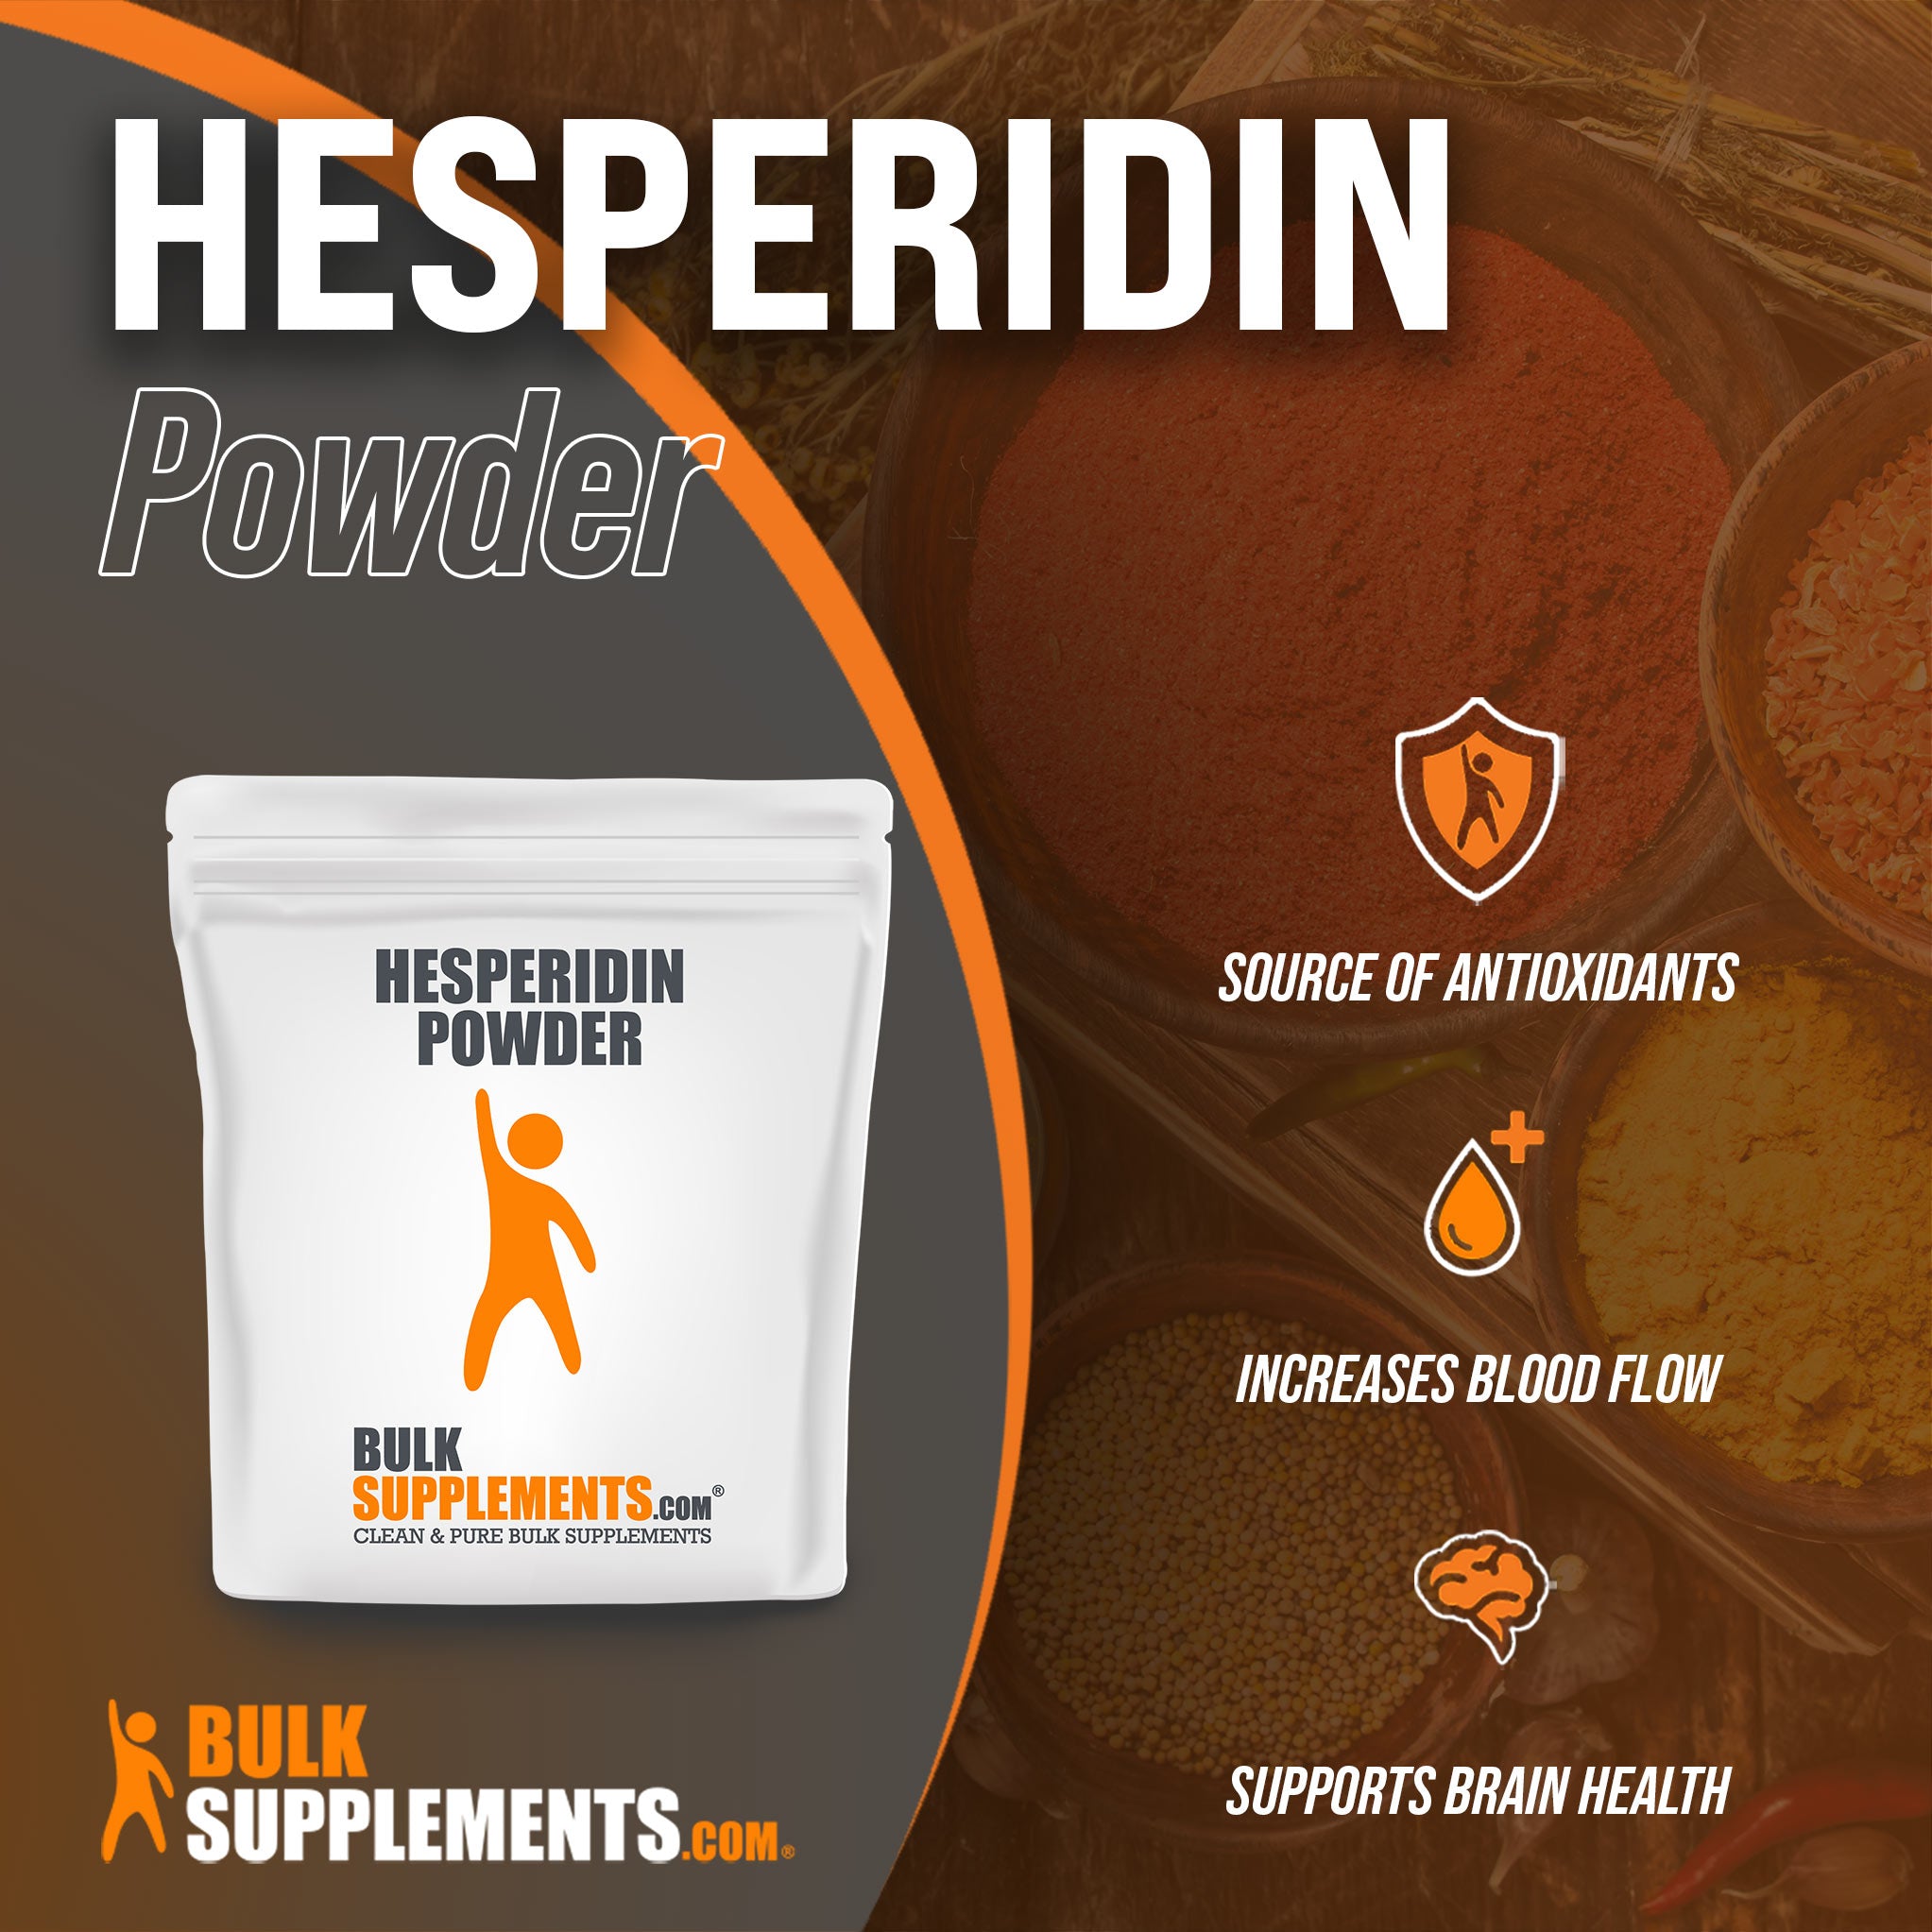 Benefits of Hesperidin; source of antioxidants, increases blood flow, supports brain health